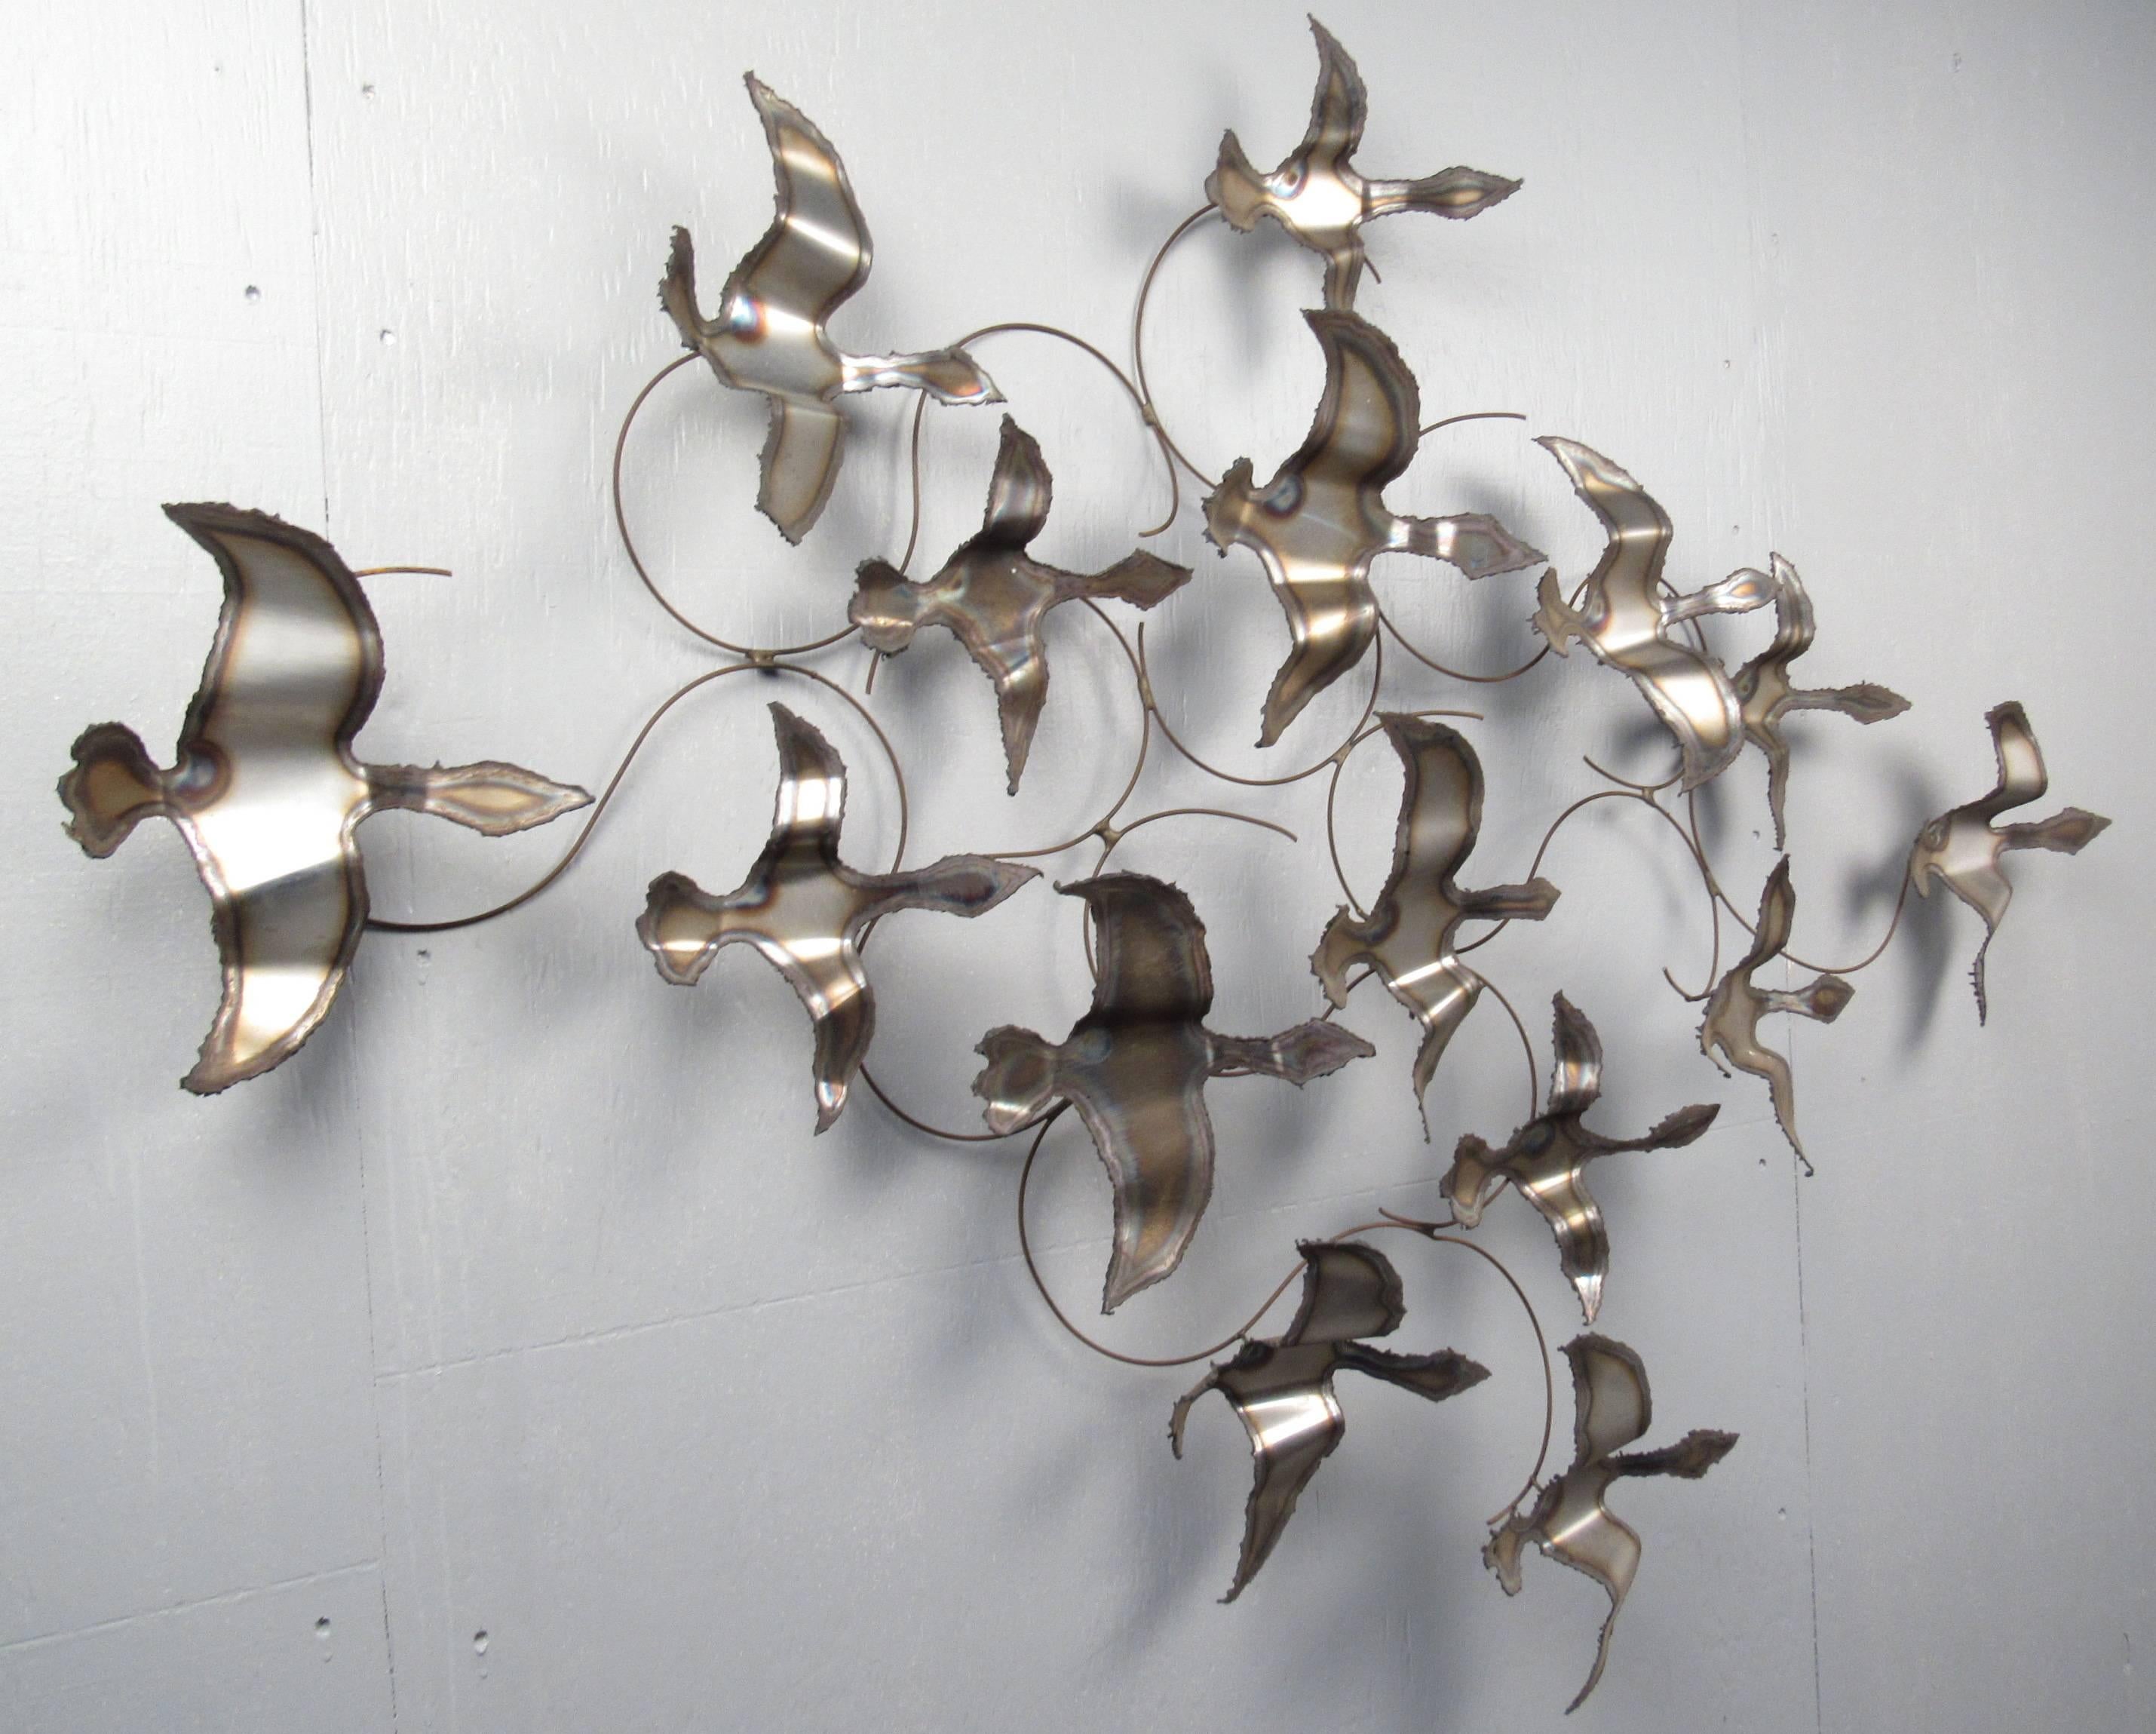 Large, decorative wall relief of birds in flight made from bent and braised metal. Please confirm item location (NY or NJ) with dealer.